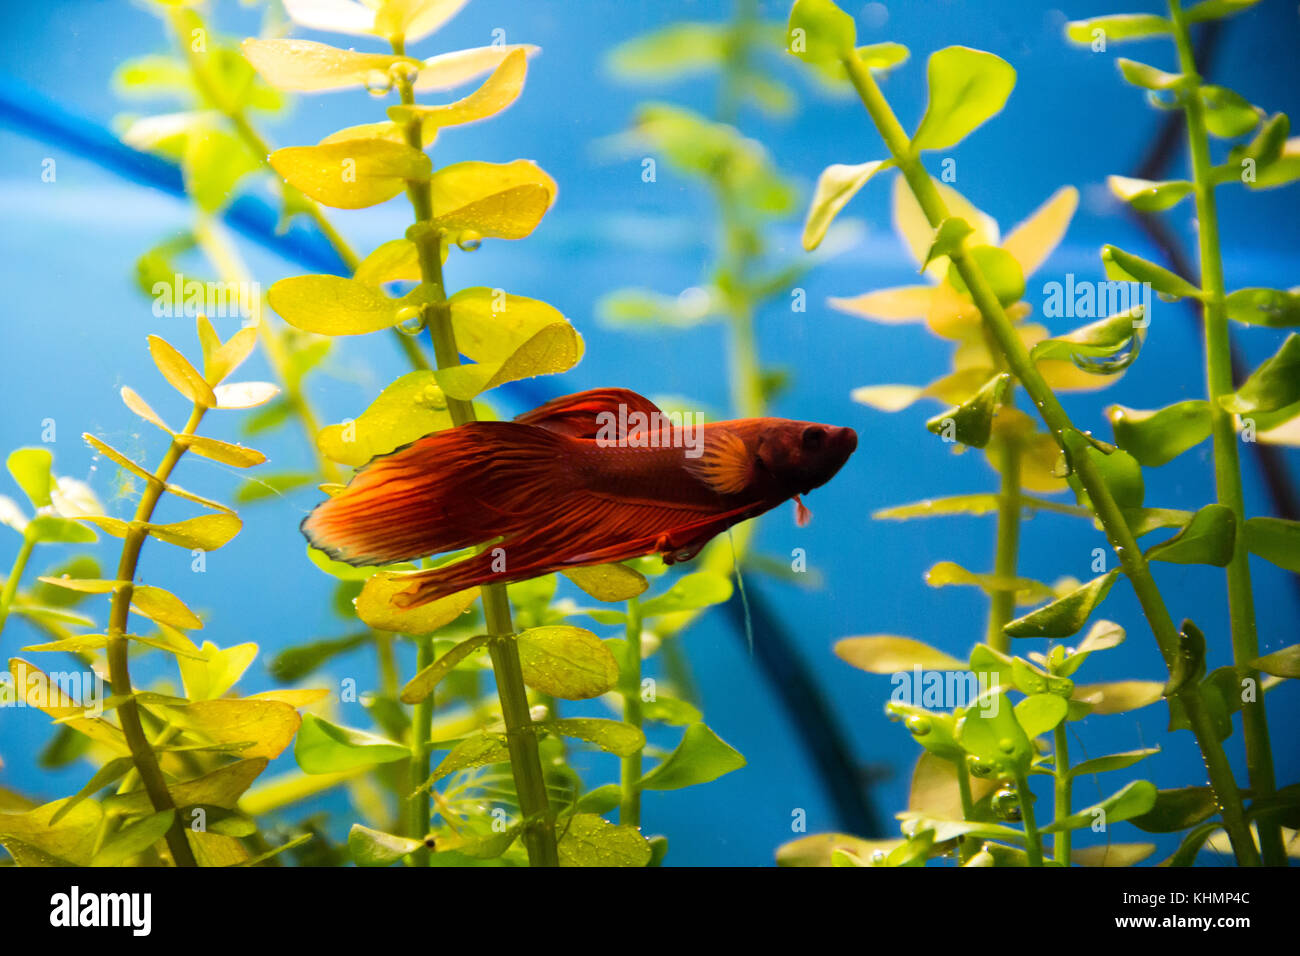 Photo of cockerel fish in blue water Stock Photo